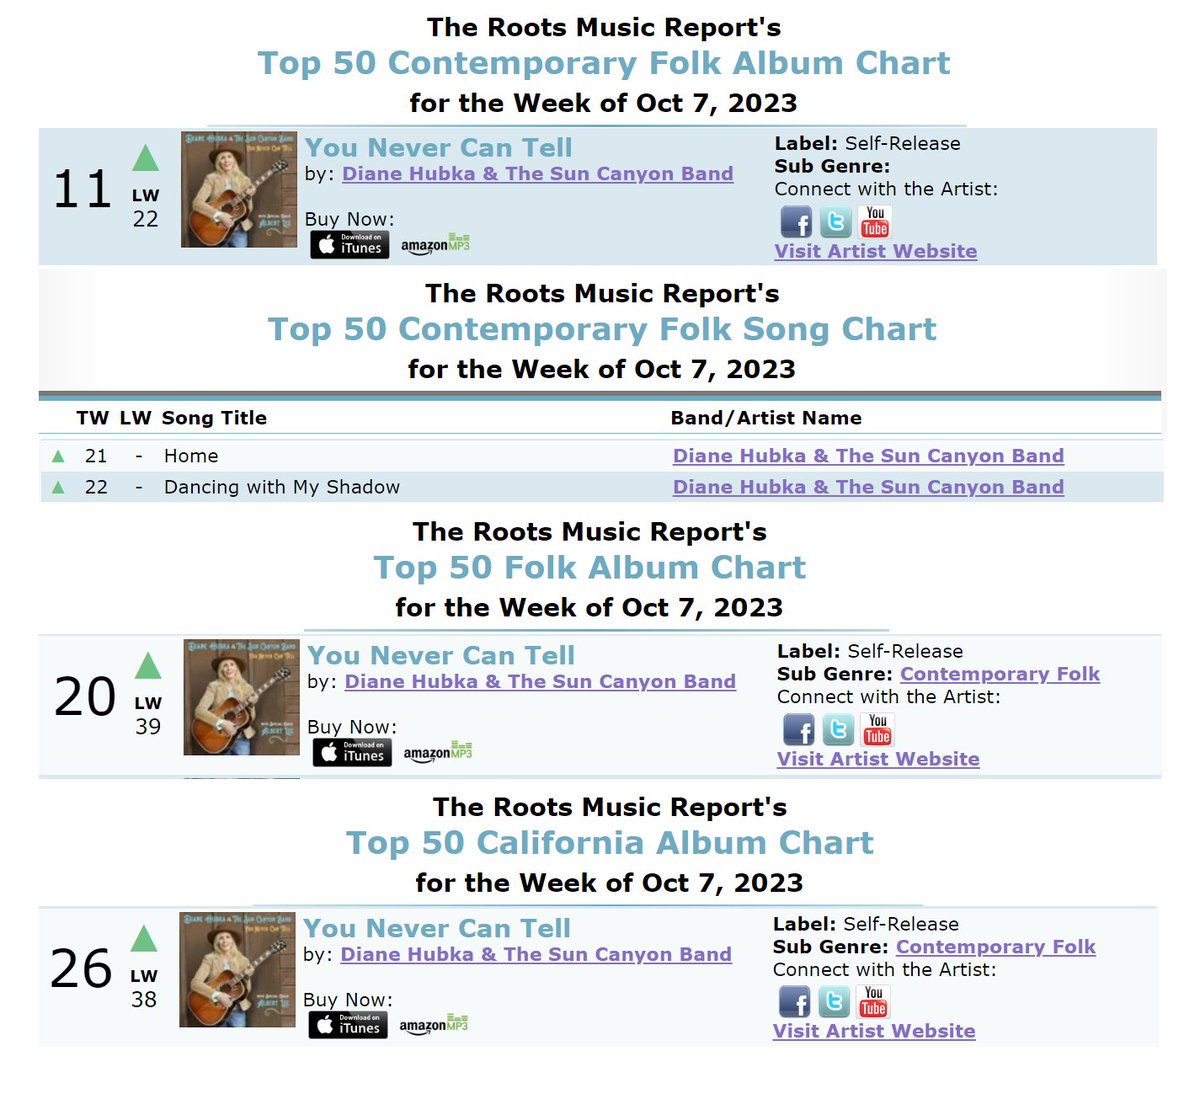 'You Never Can Tell' is still making it's mark on @RootsMusReport as of Oct 7th!

Find Us at suncanyonband.com

#SunCanyonBand #DianeHubka #YouNeverCanTell #RMR #RootsMusicReport #RadioCharts #ContemporaryFolk